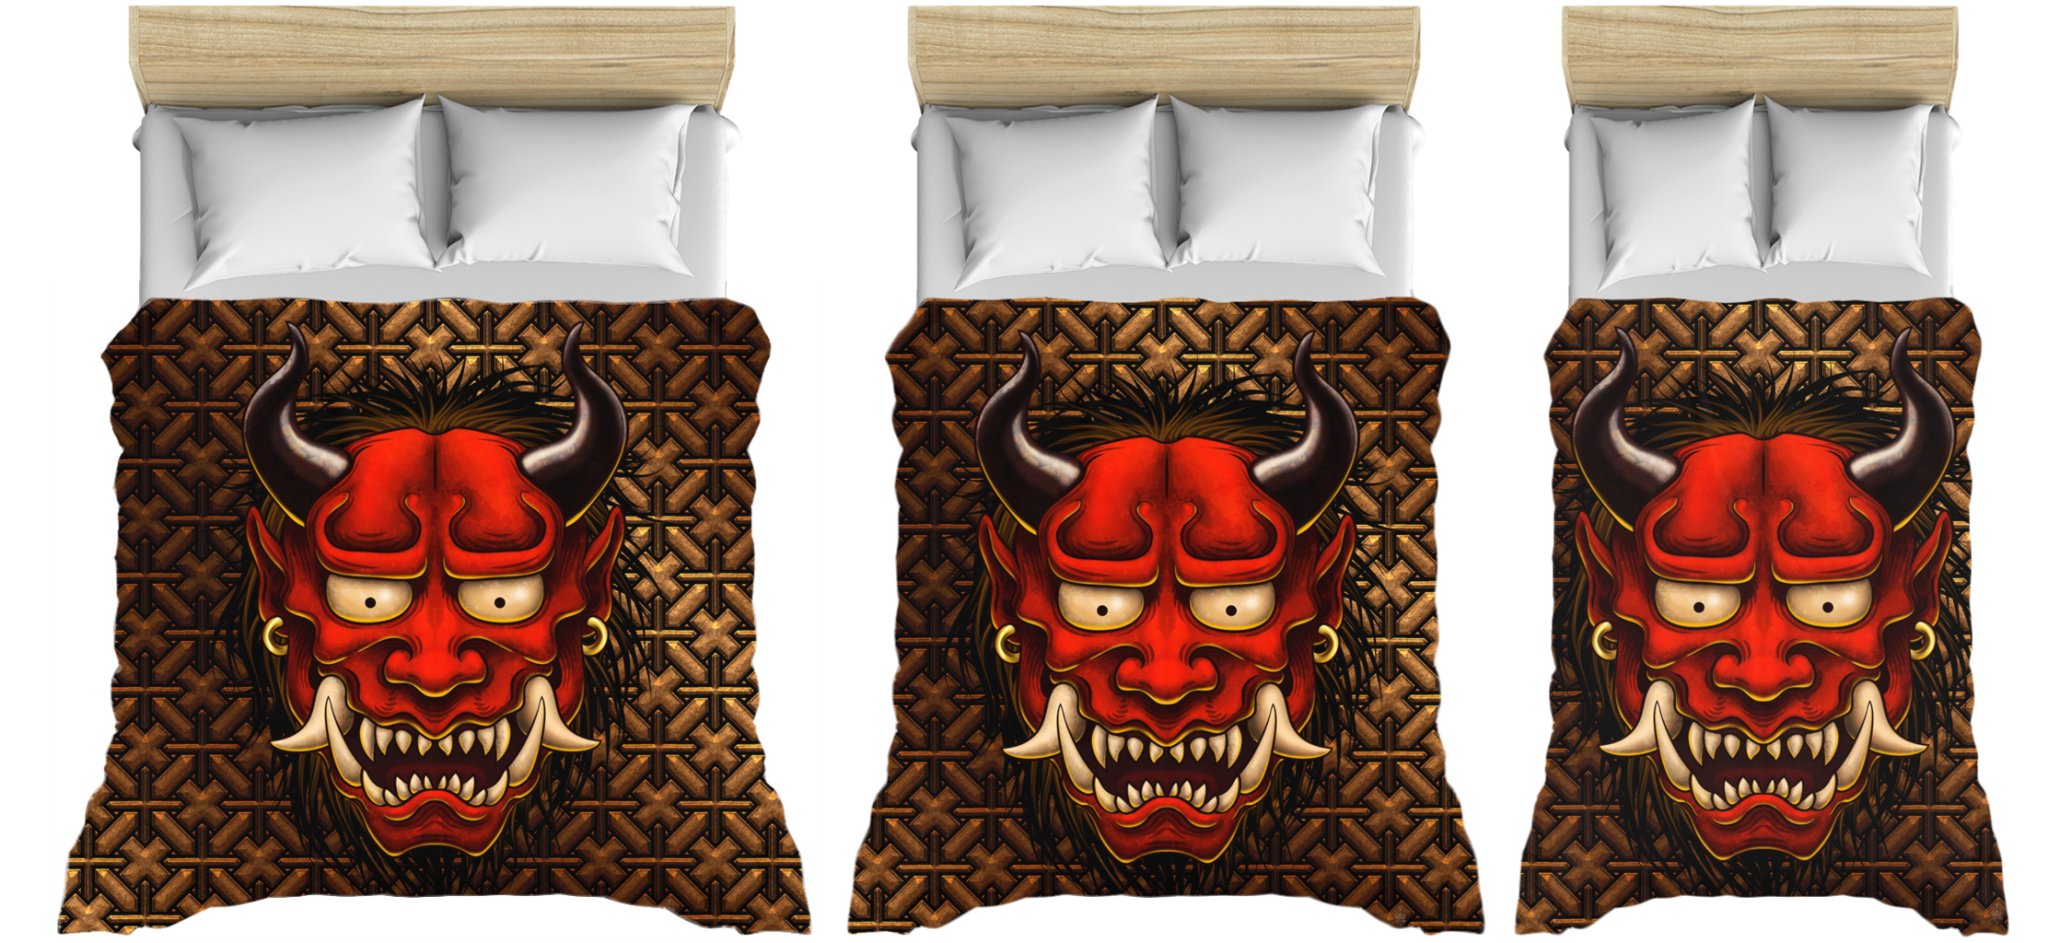 Oni Bedding Set, Comforter or Duvet, Anime Bed Cover, Bedroom Decor, King, Queen & Twin Size - White or Red Japanese Demon, Original 2 Colors - Abysm Internal